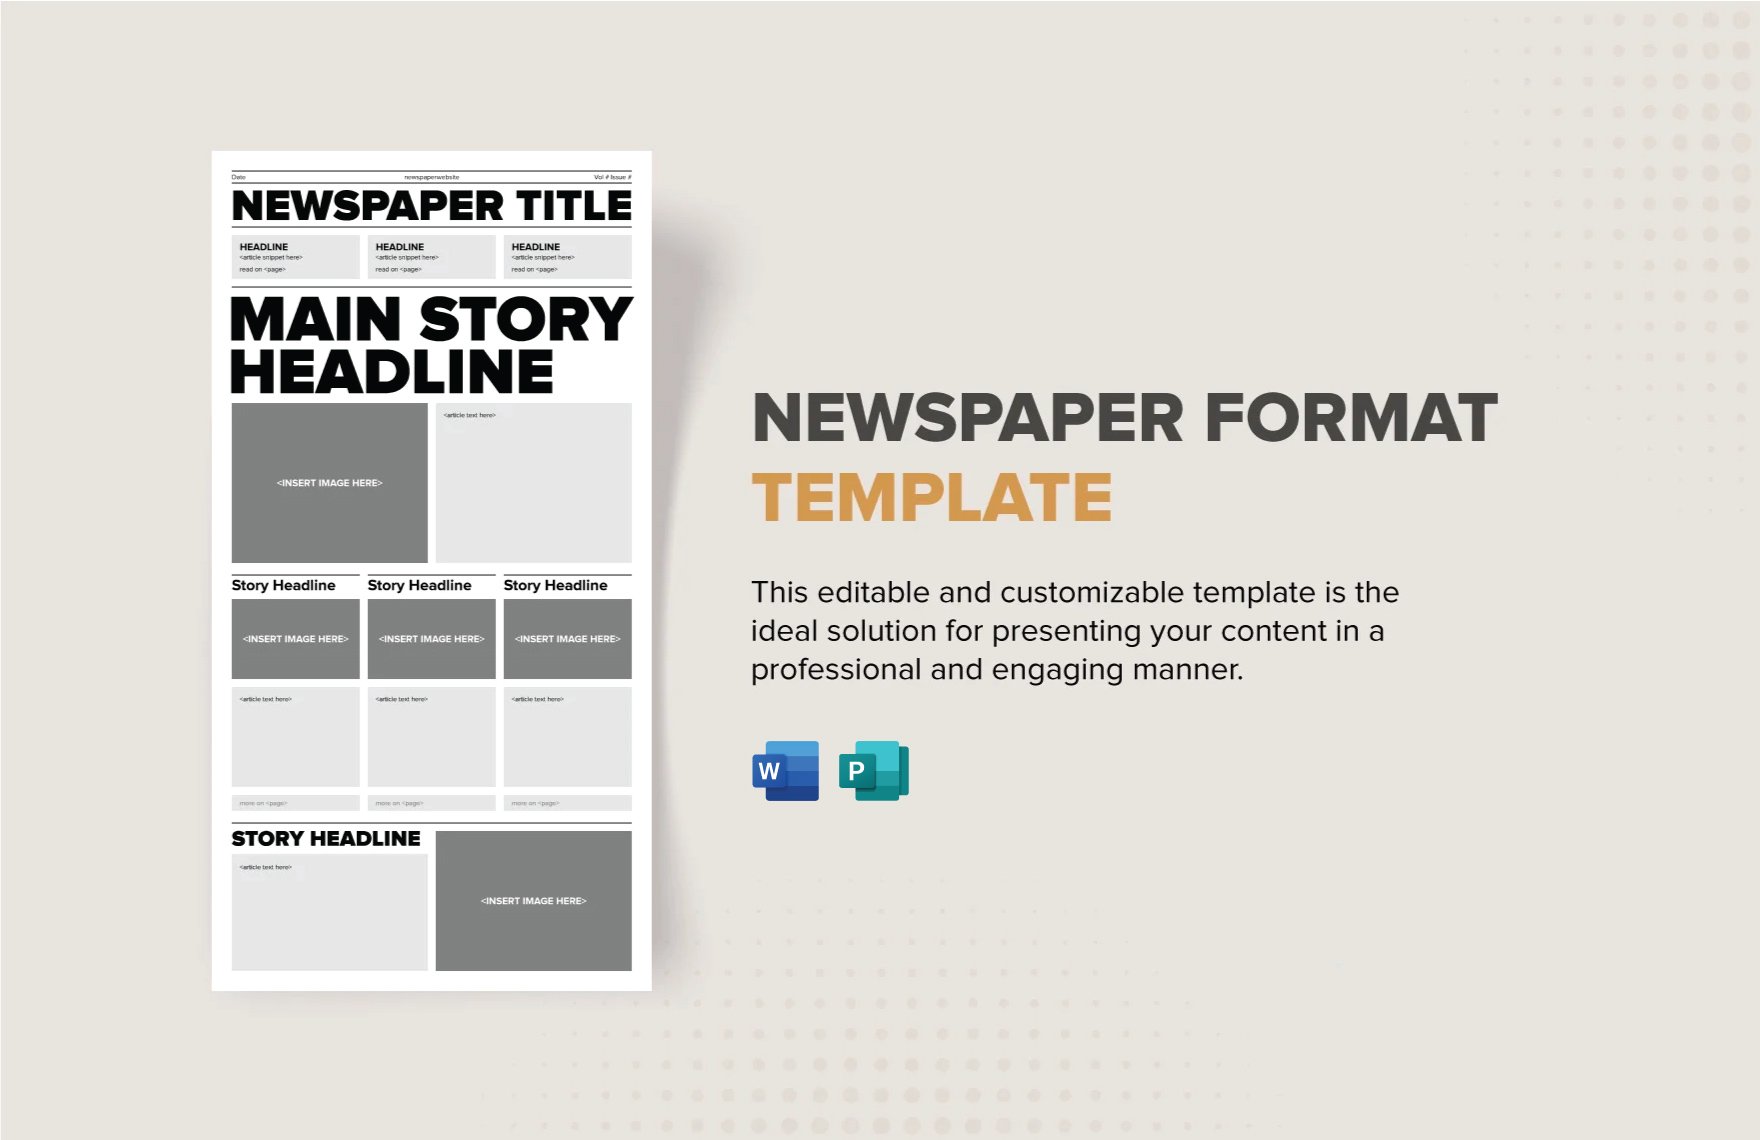 Newspaper Format Template in Word, Publisher